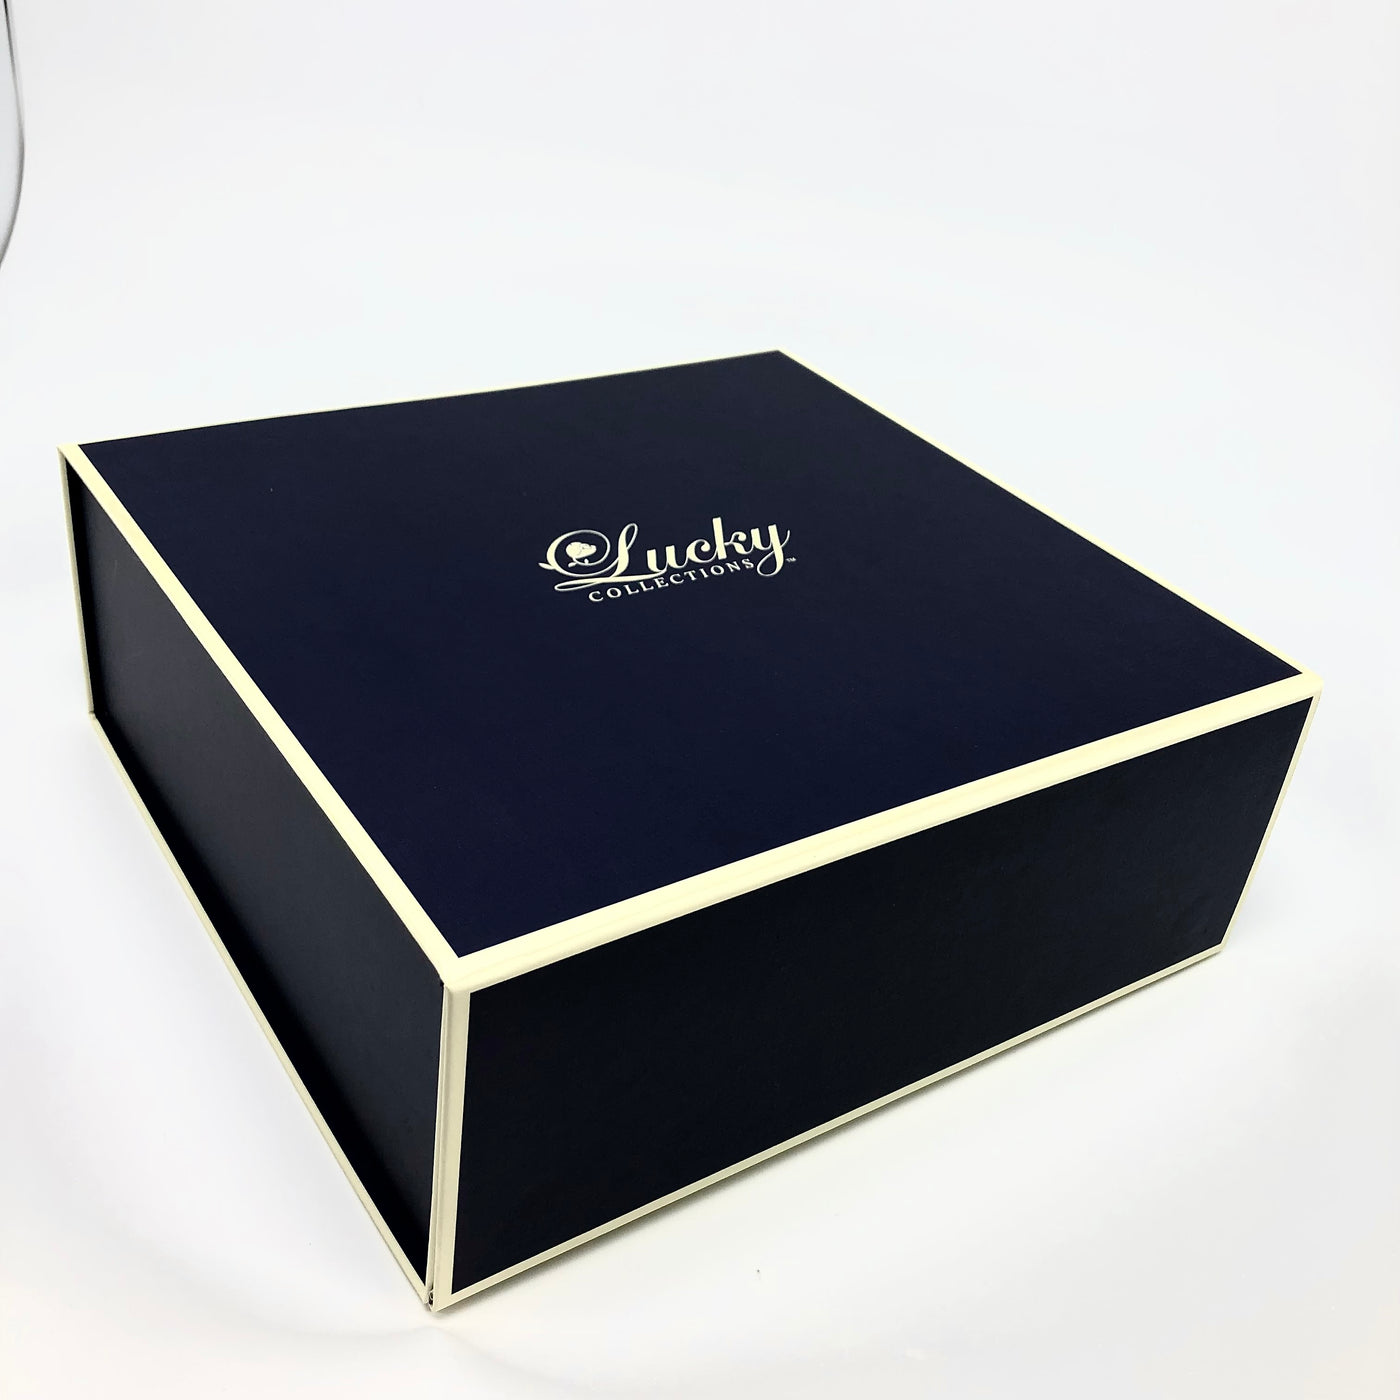 Tiara comes in custom box for convenient presentation and Keepsake. Lucky Collections ™